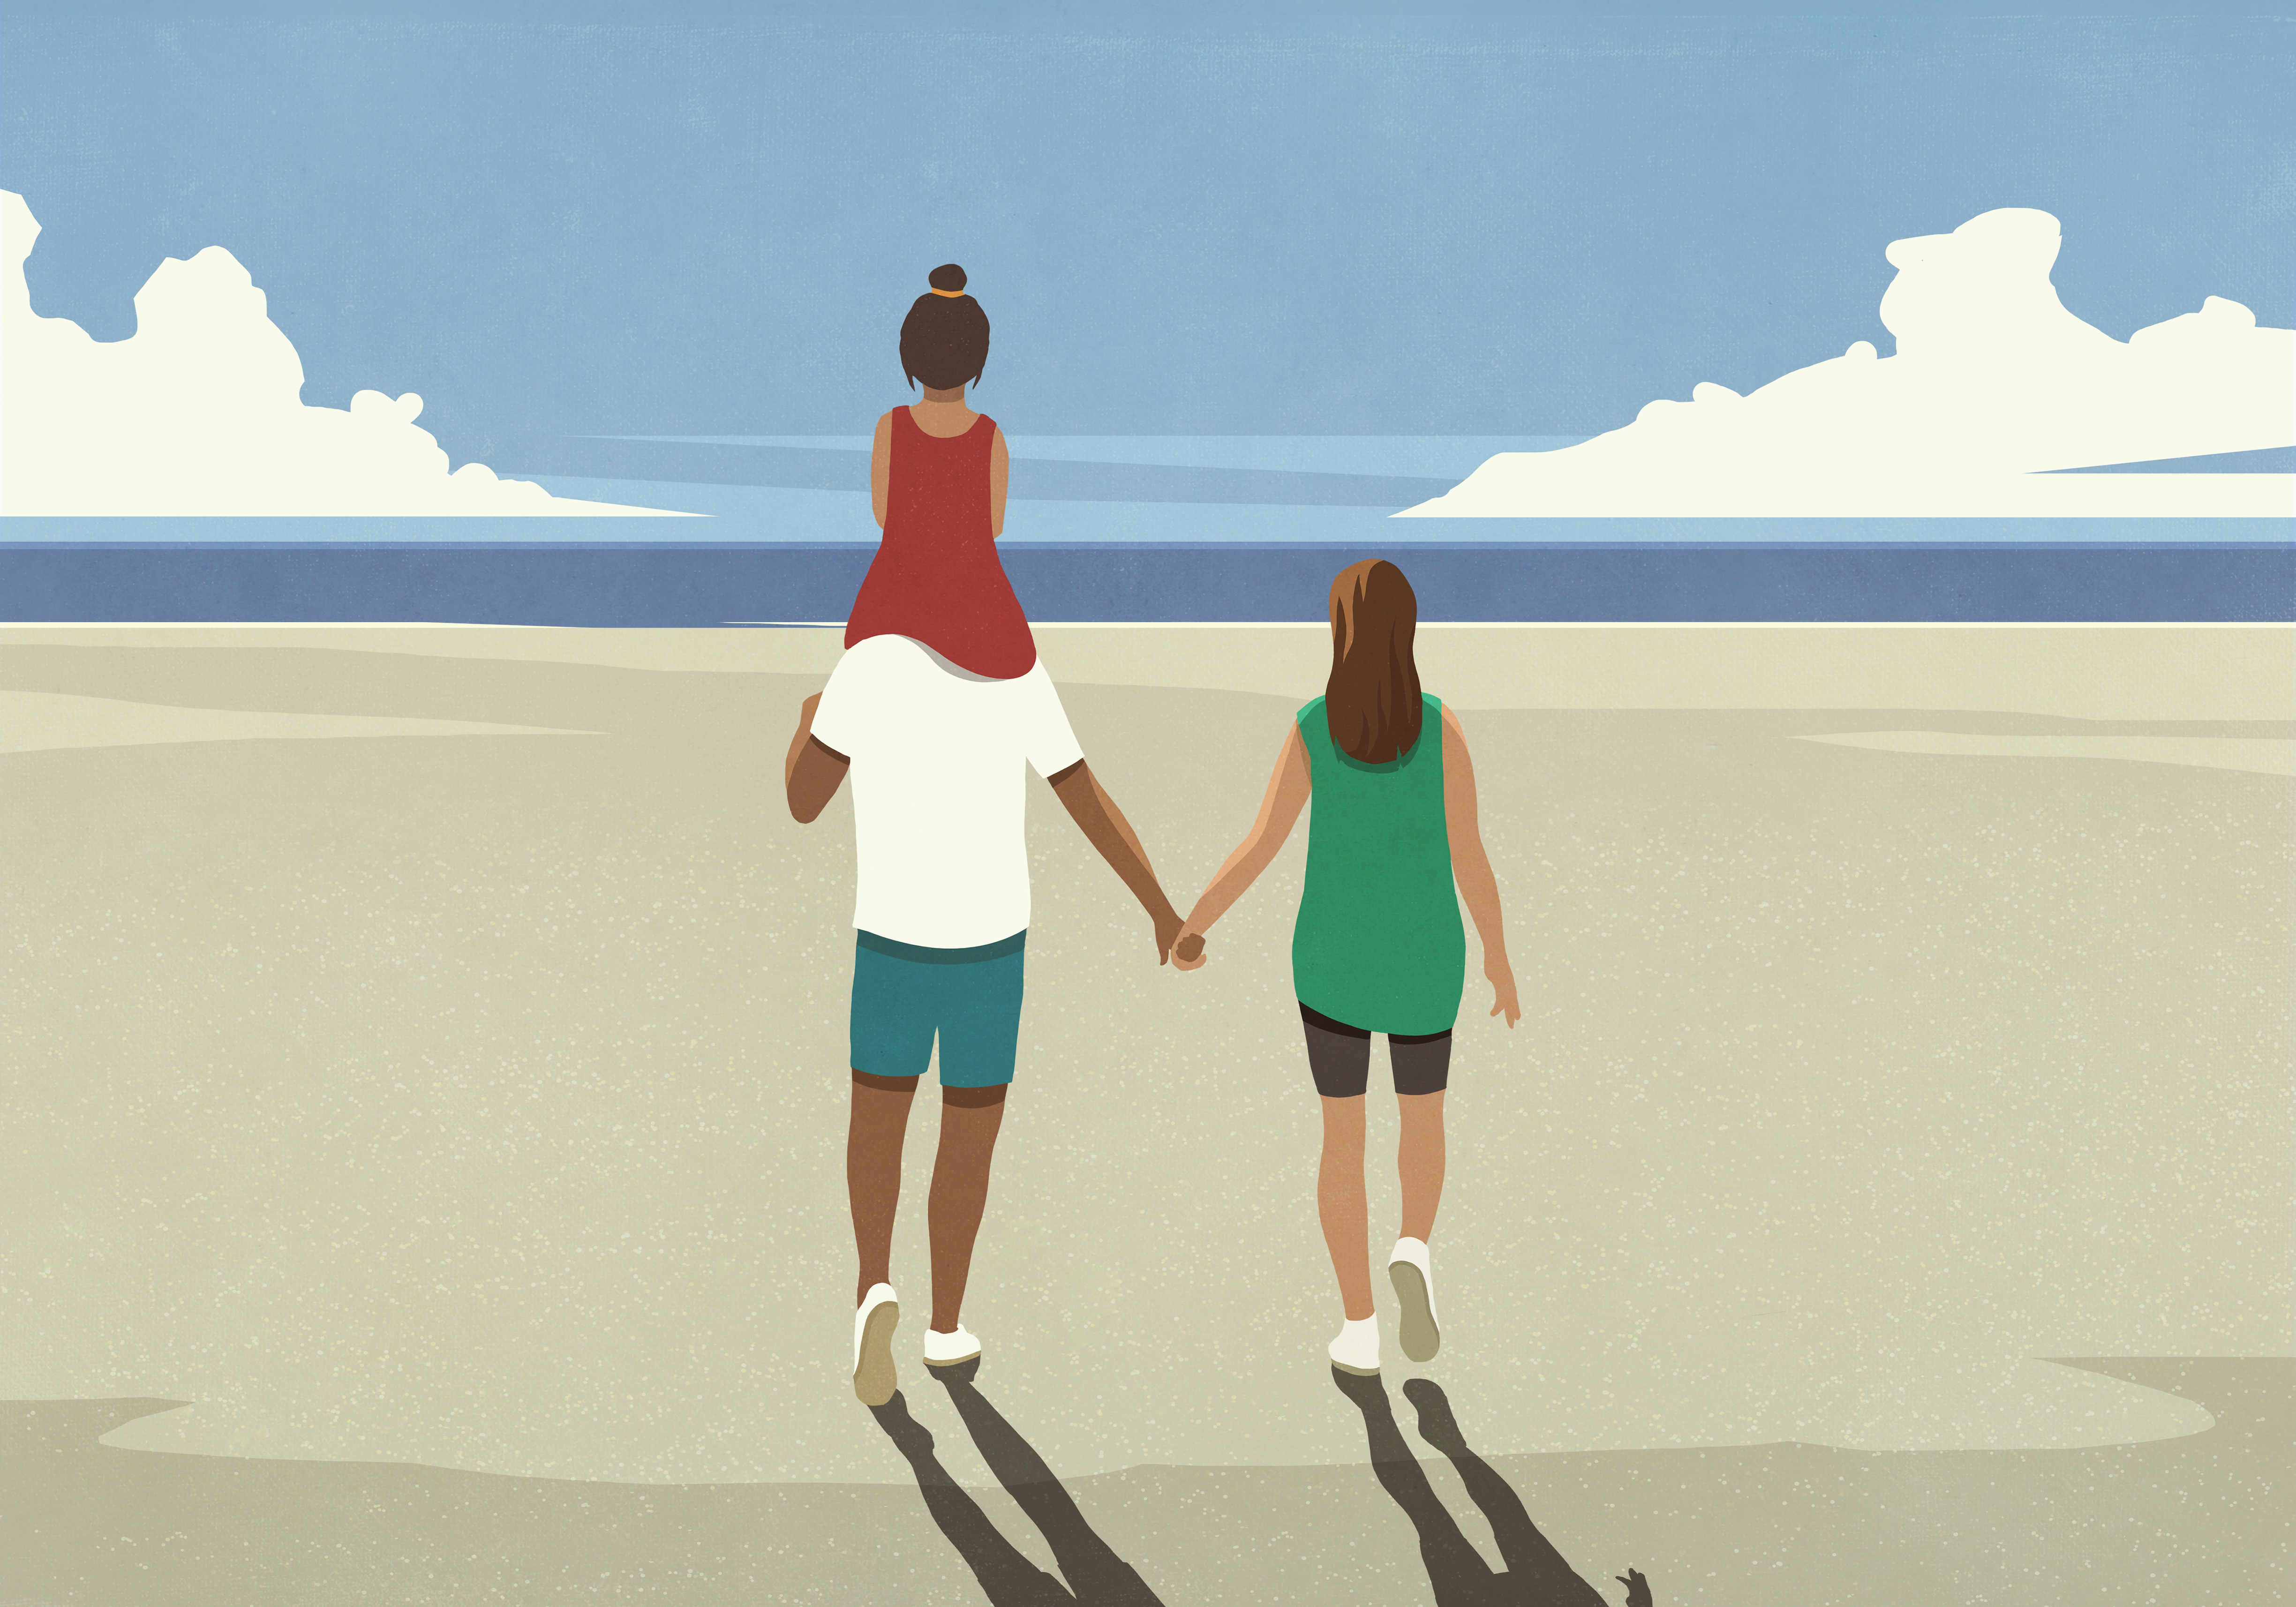 An illustration of a couple walking hand-in-hand on a beach. On one of their shoulders rides a child.